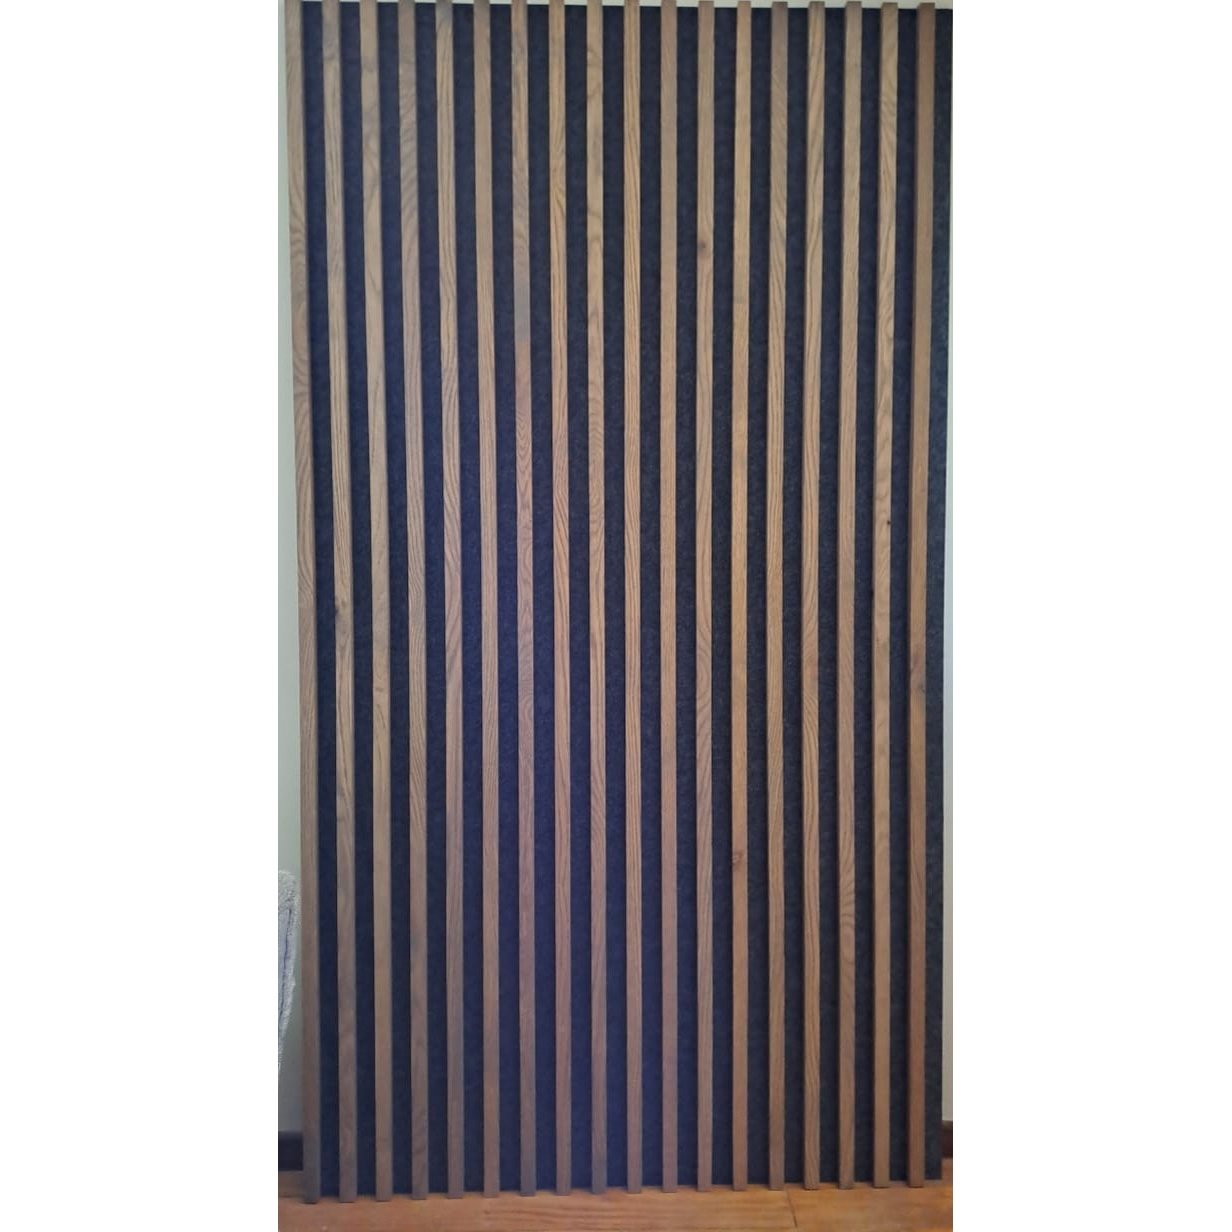 Acoustic slat wall panel made with white oak and charcoal acoustic board